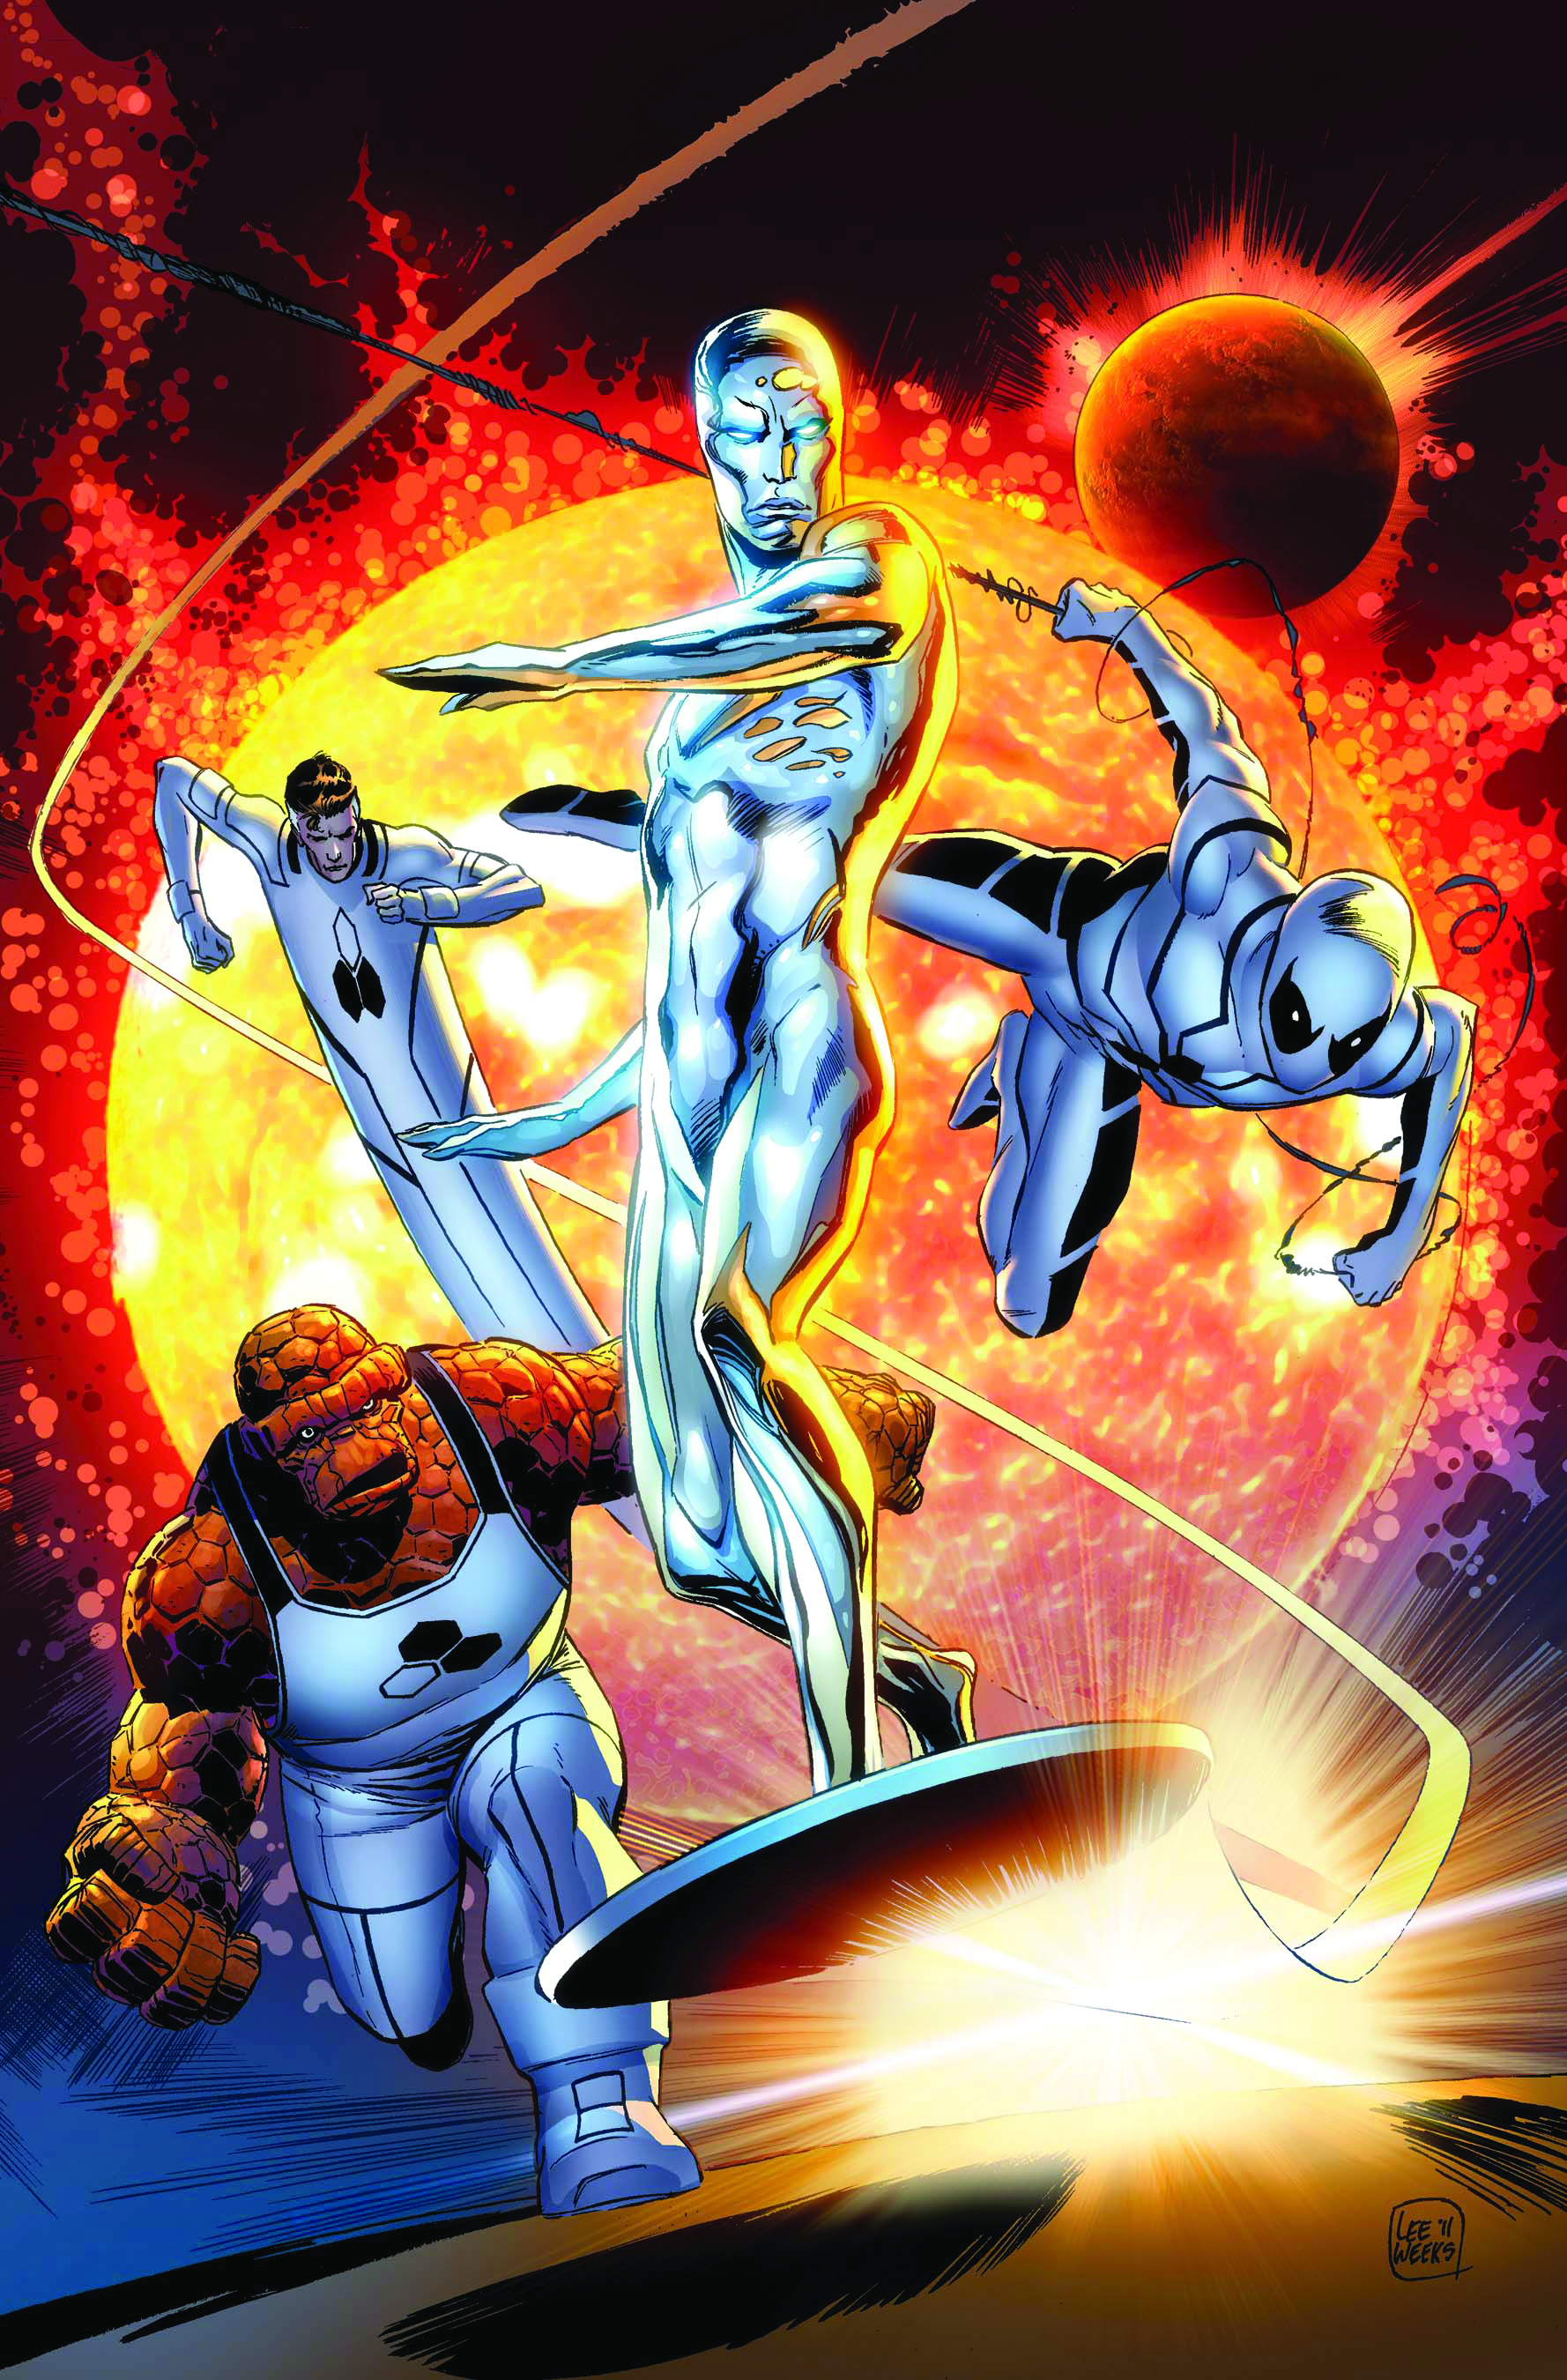 SILVER SURFER #4 (OF 5)